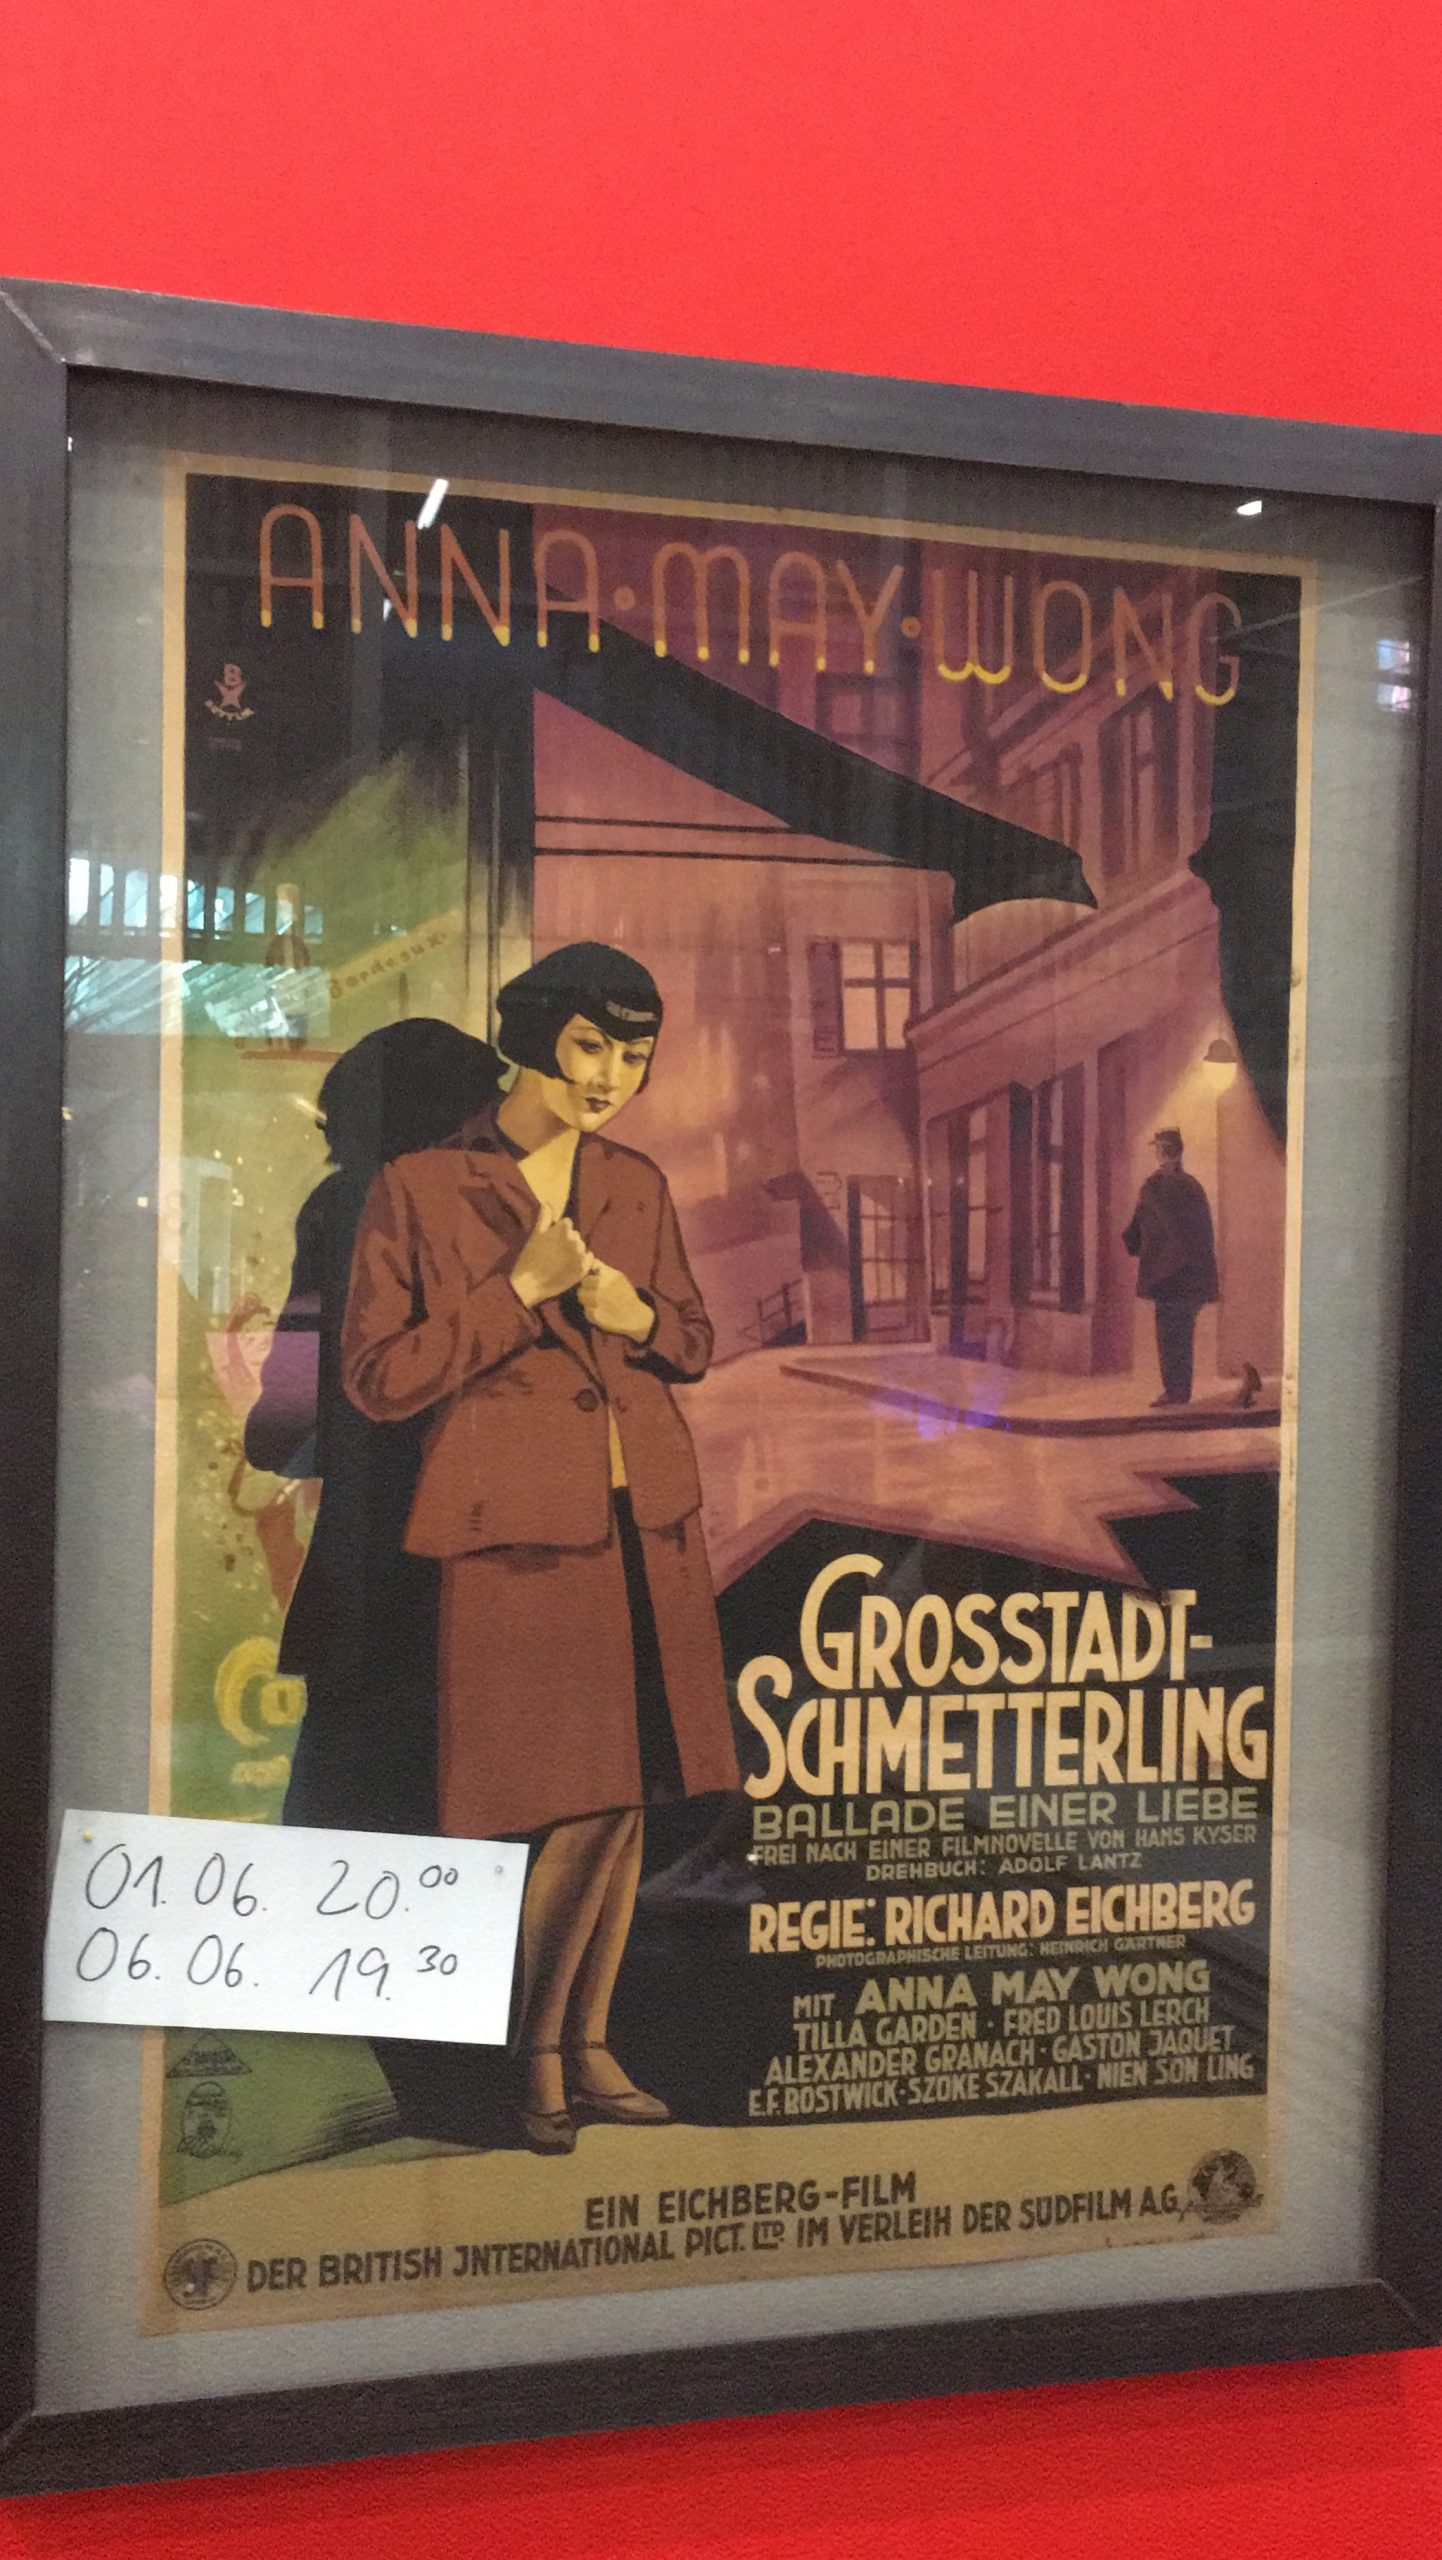 A framed, illustrated movie poster with Anna May Wong in the foreground. In the background one can see an alley and the outlines of another person. At the top of the poster it says “Anna May Wong”. Below is the caption “Großstadtschmetterling” (translated: Big City Butterfly). On the frame of the movie poster is a white note with black writing, it says “01.06. 8pm, 06.06. 7.30 pm”.